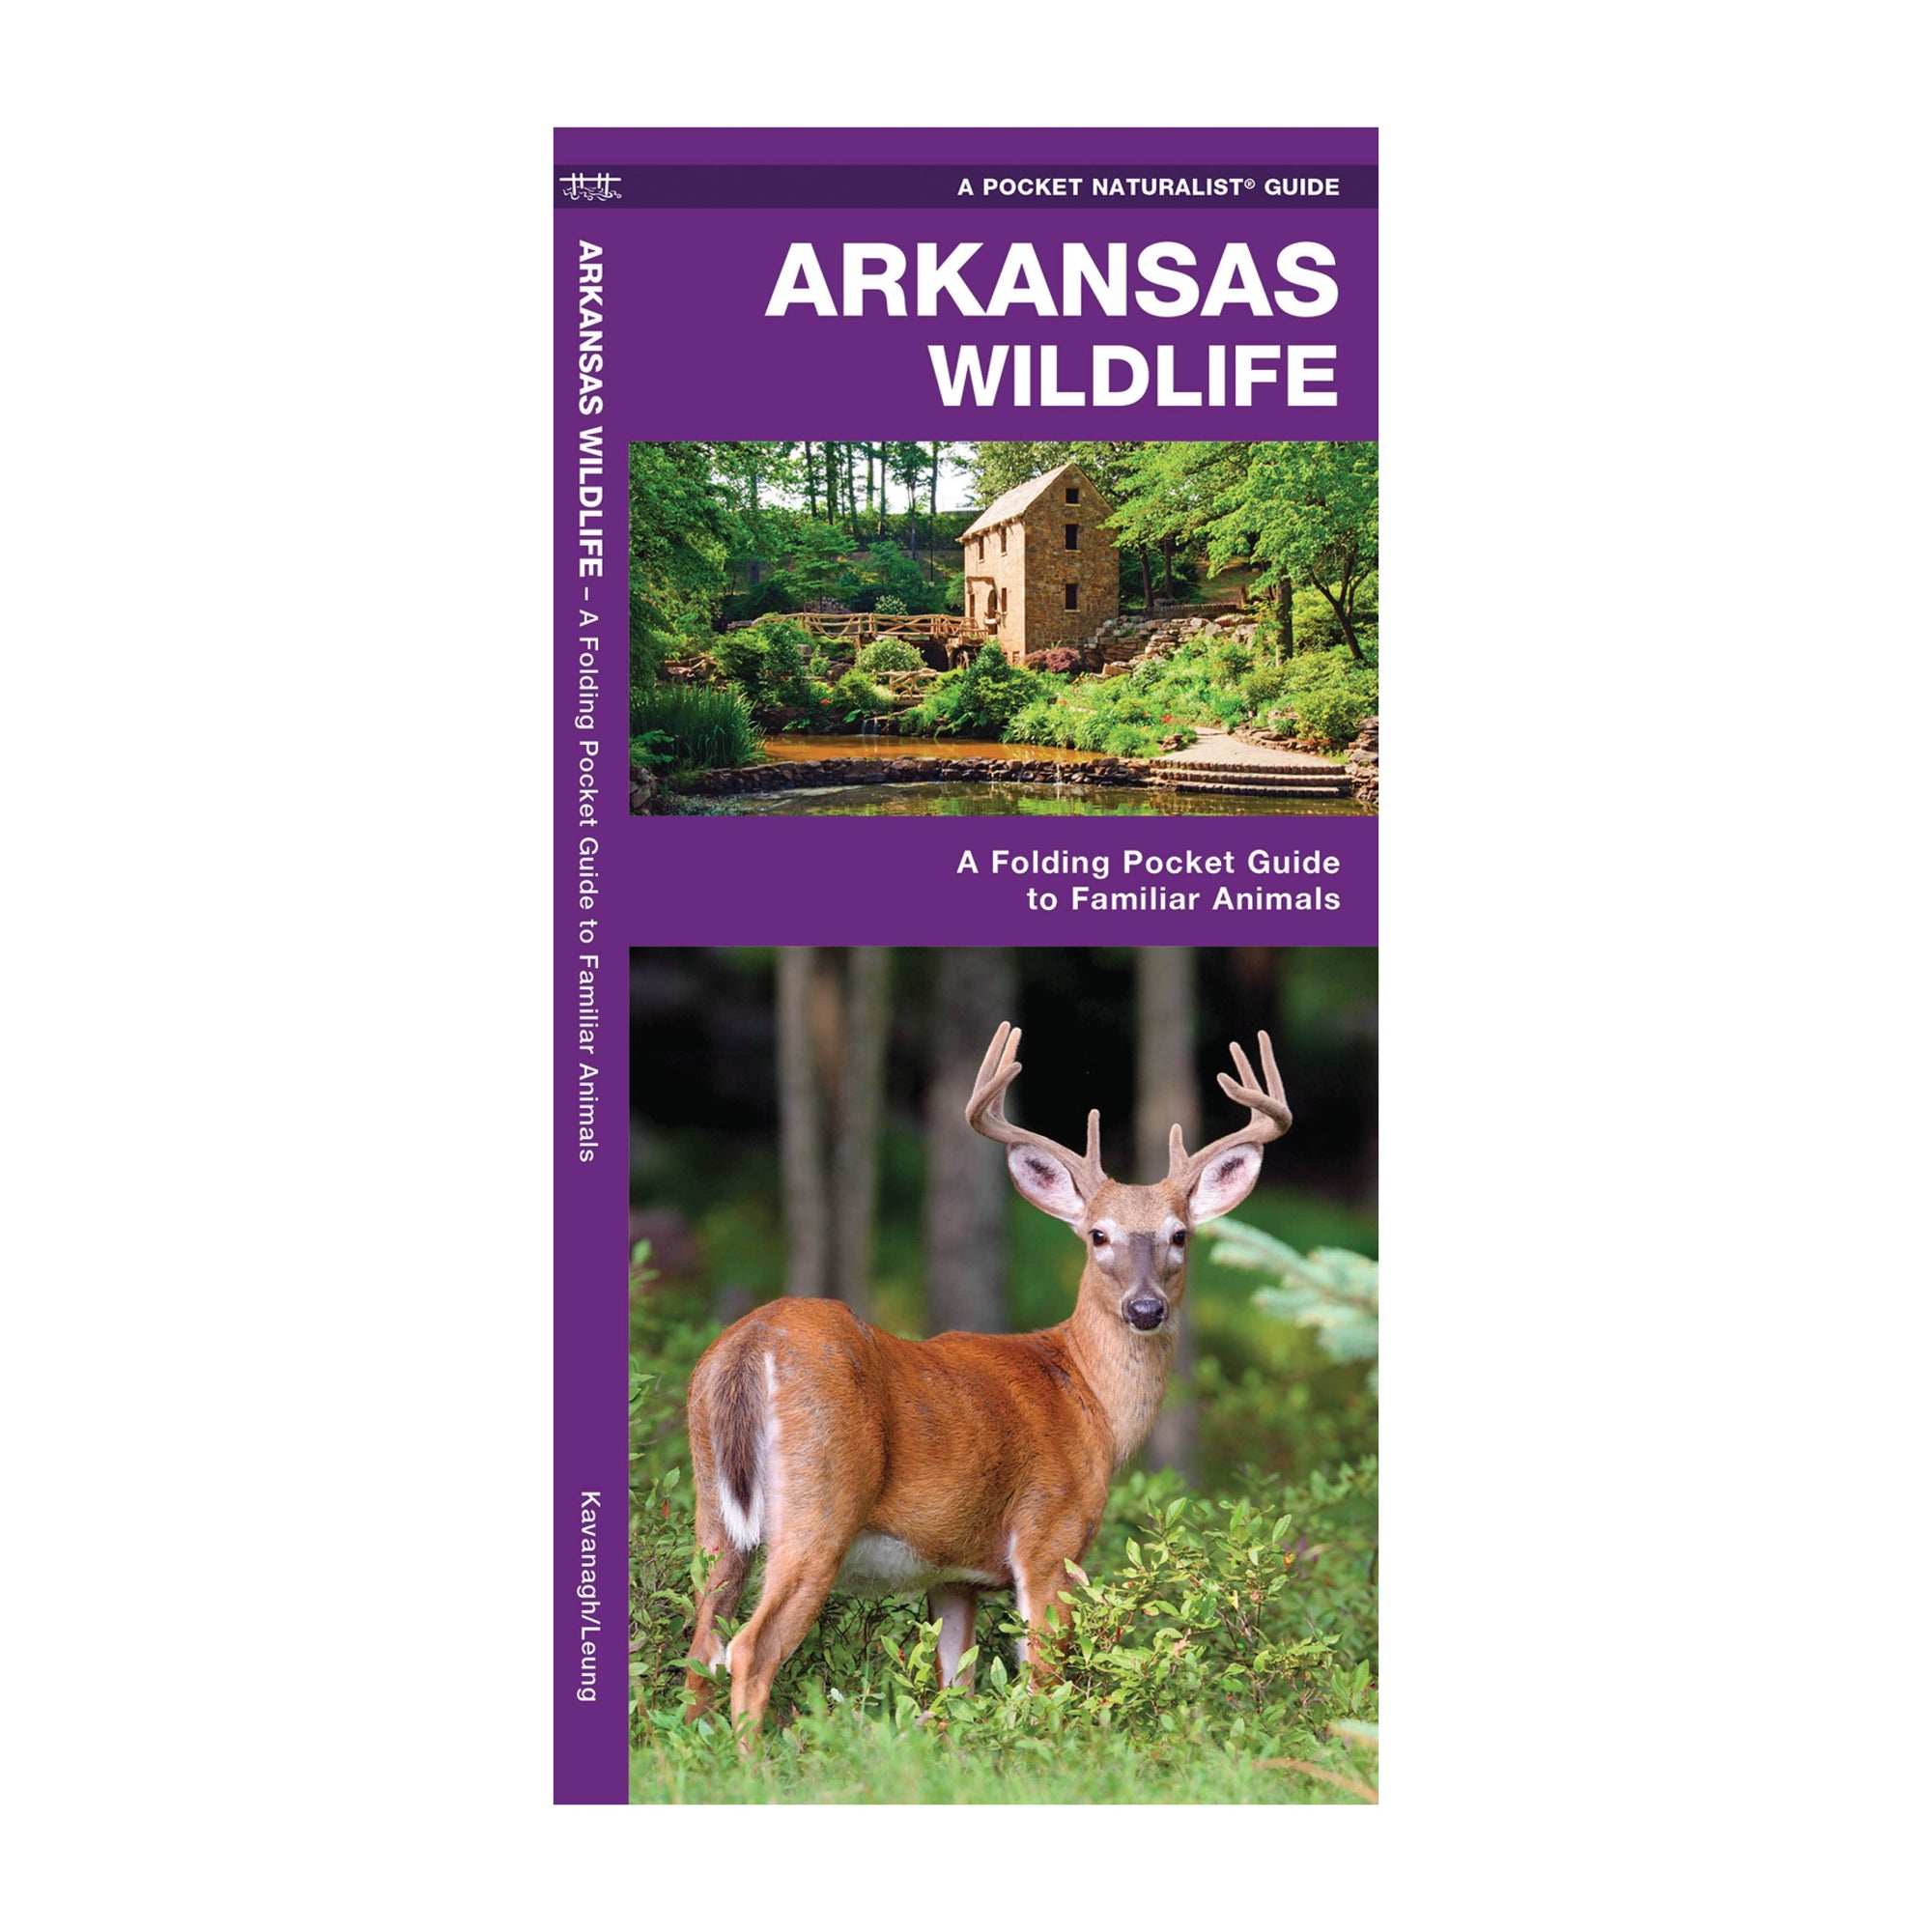 Cover of "Arkansas Wildlife," featuring a deer in a forest and an inset photo of a stone building by a stream, showcasing the nature hotspots of the Natural State